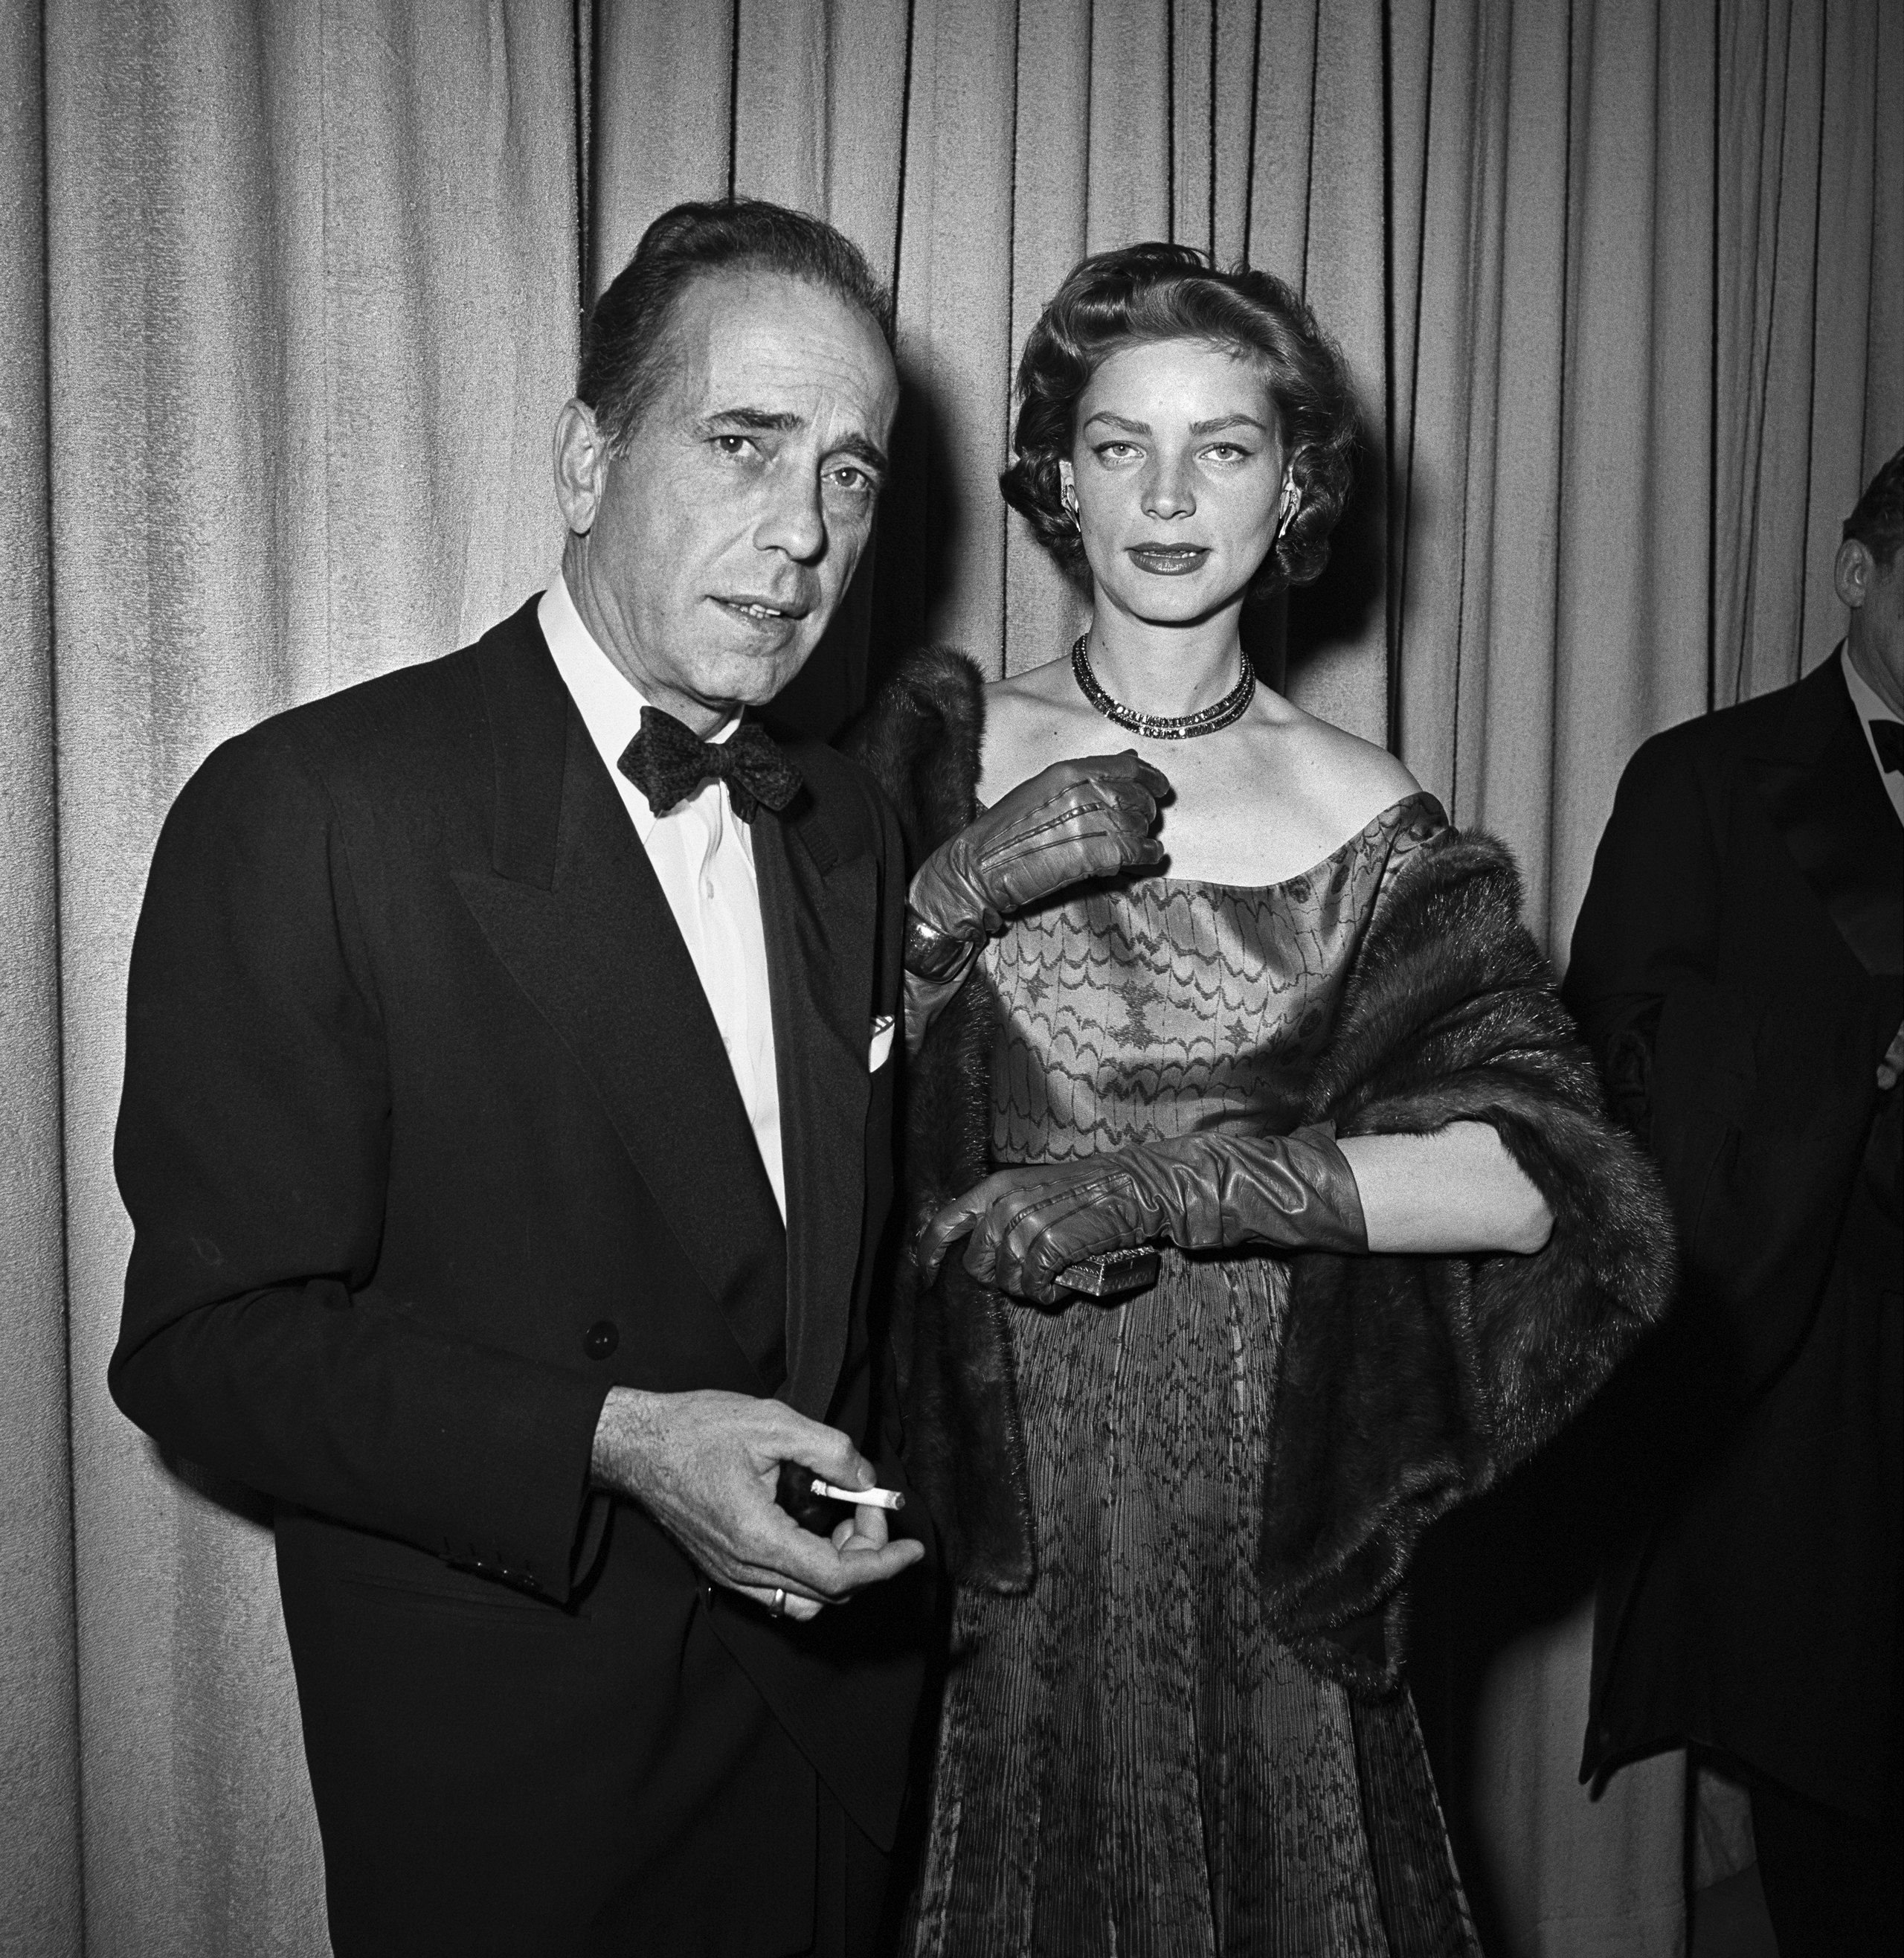 Humphrey Bogart and Lauren Bacall pose at the Academy Awards ceremony on March 20, 1952, in Los Angeles, California. | Source: Frank Worth/Capital Art/Getty Images